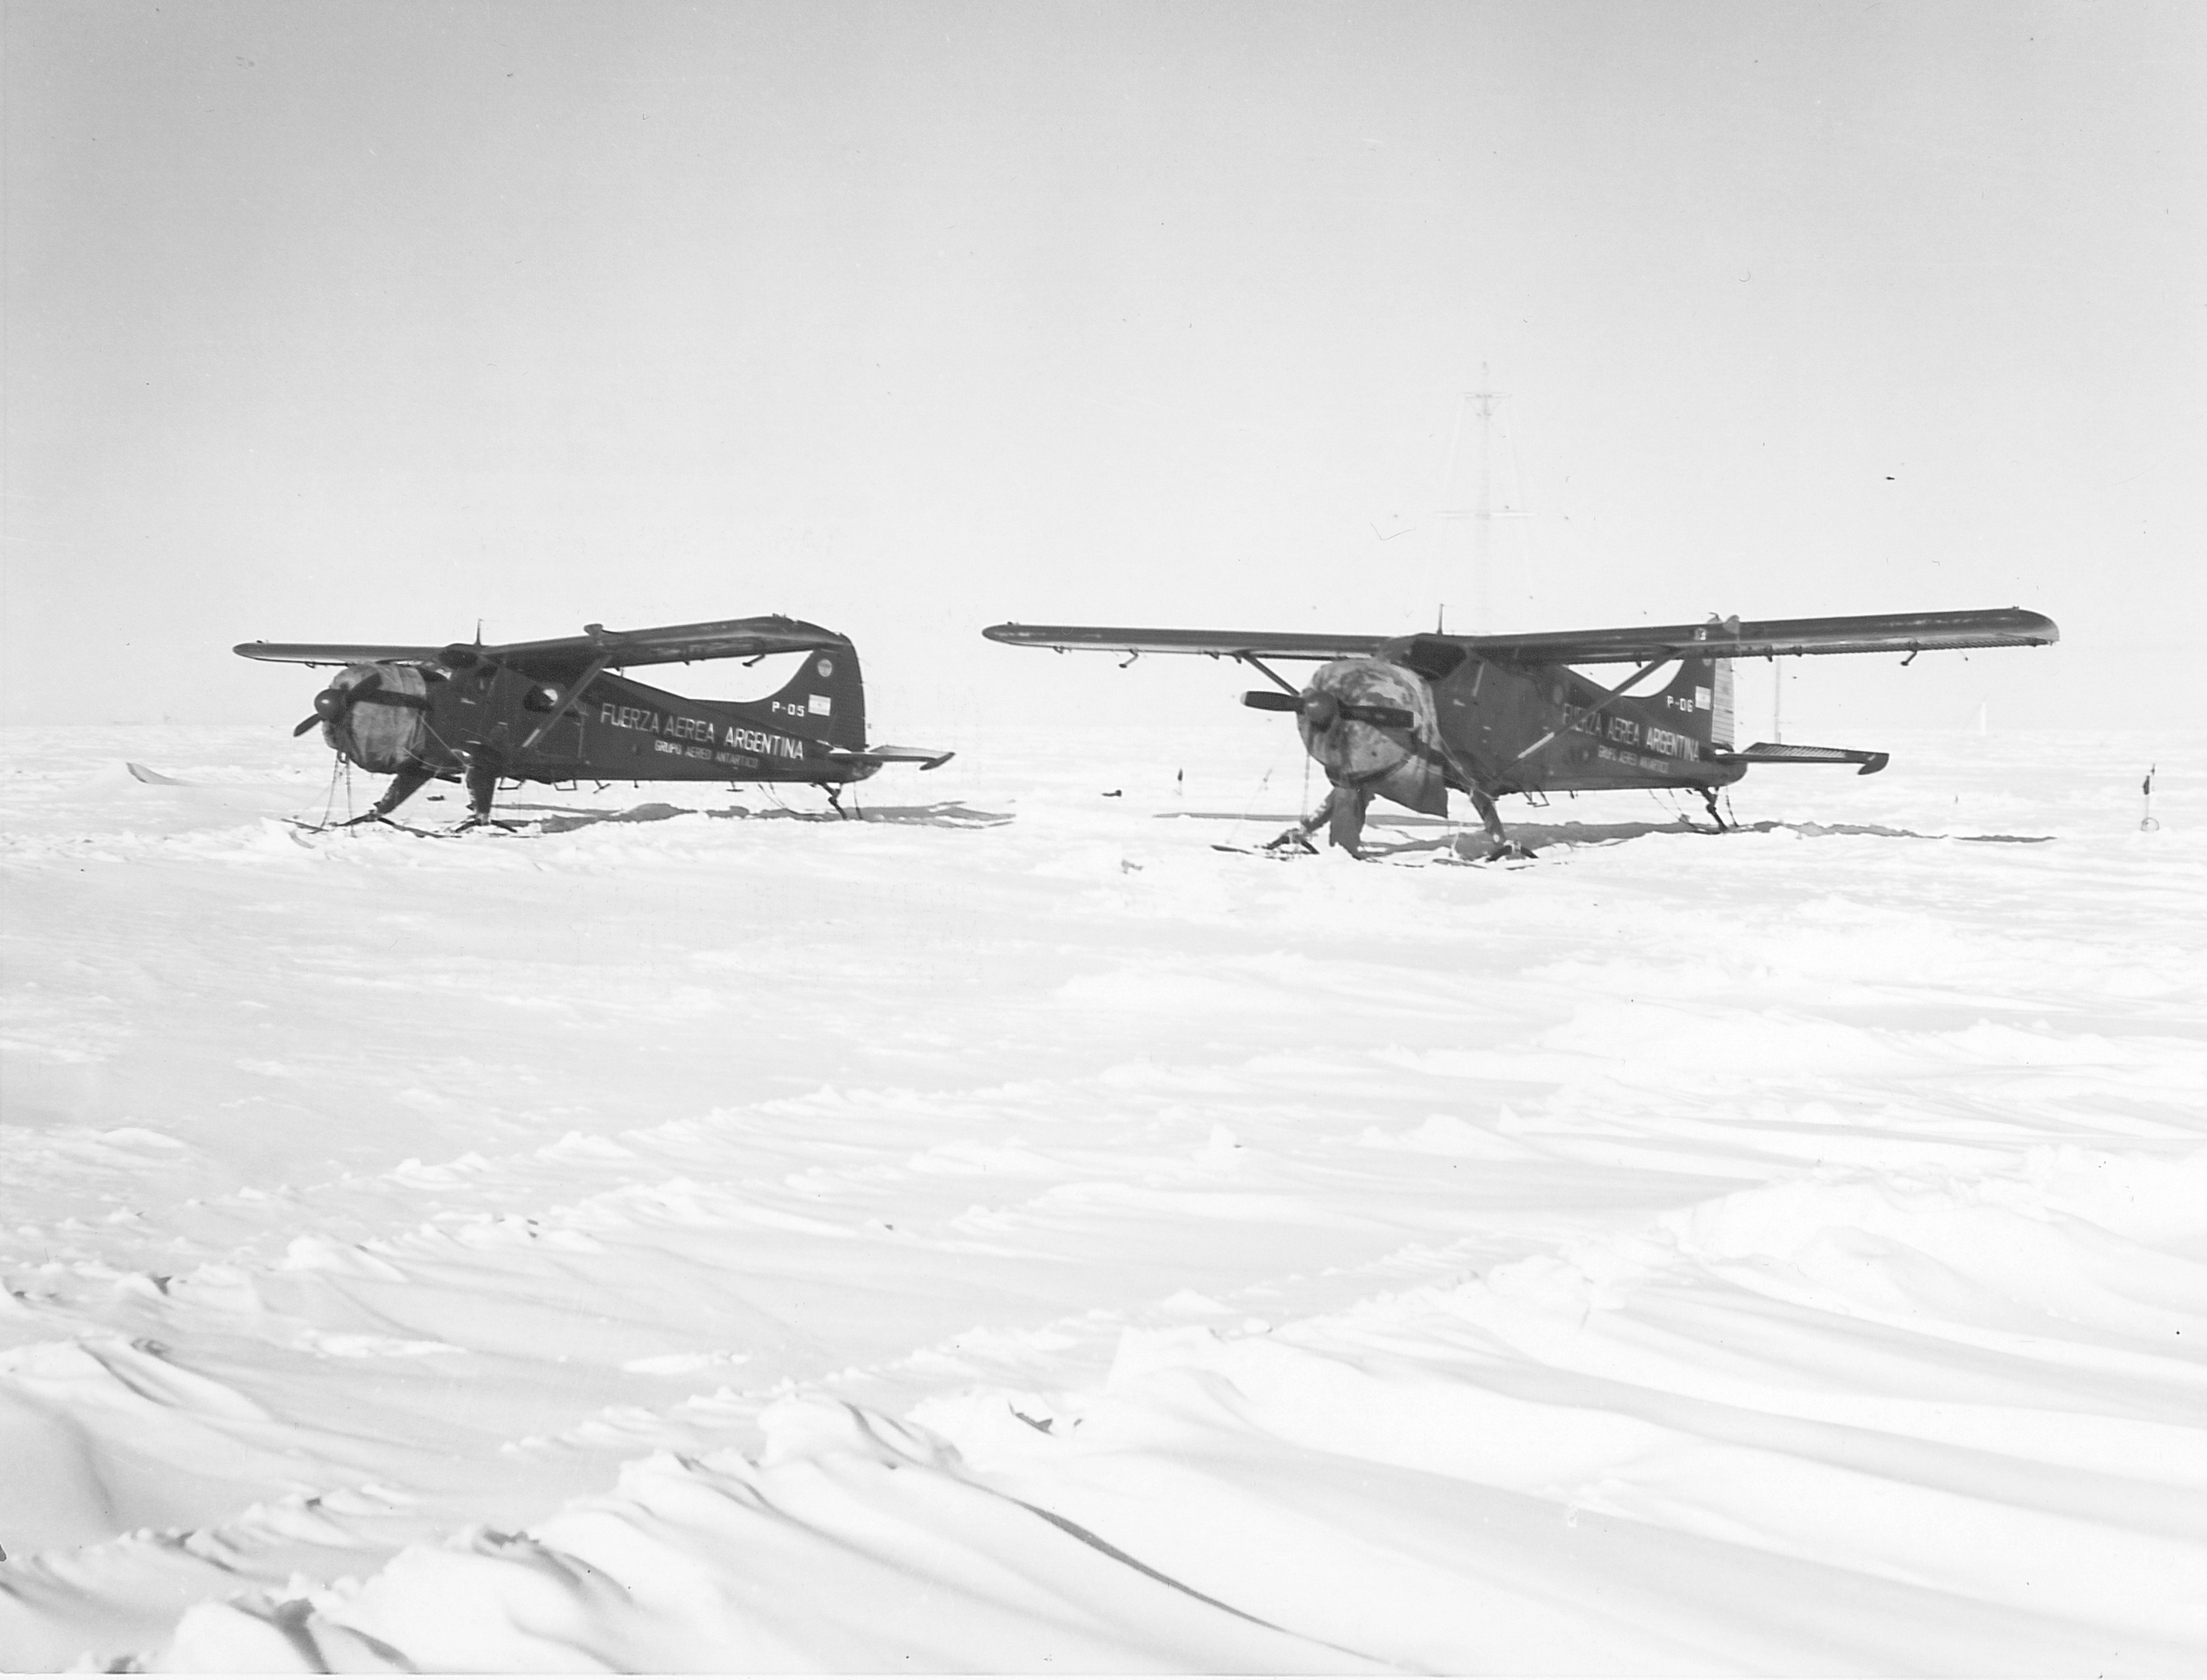 Two airplanes on a snowy landscape.